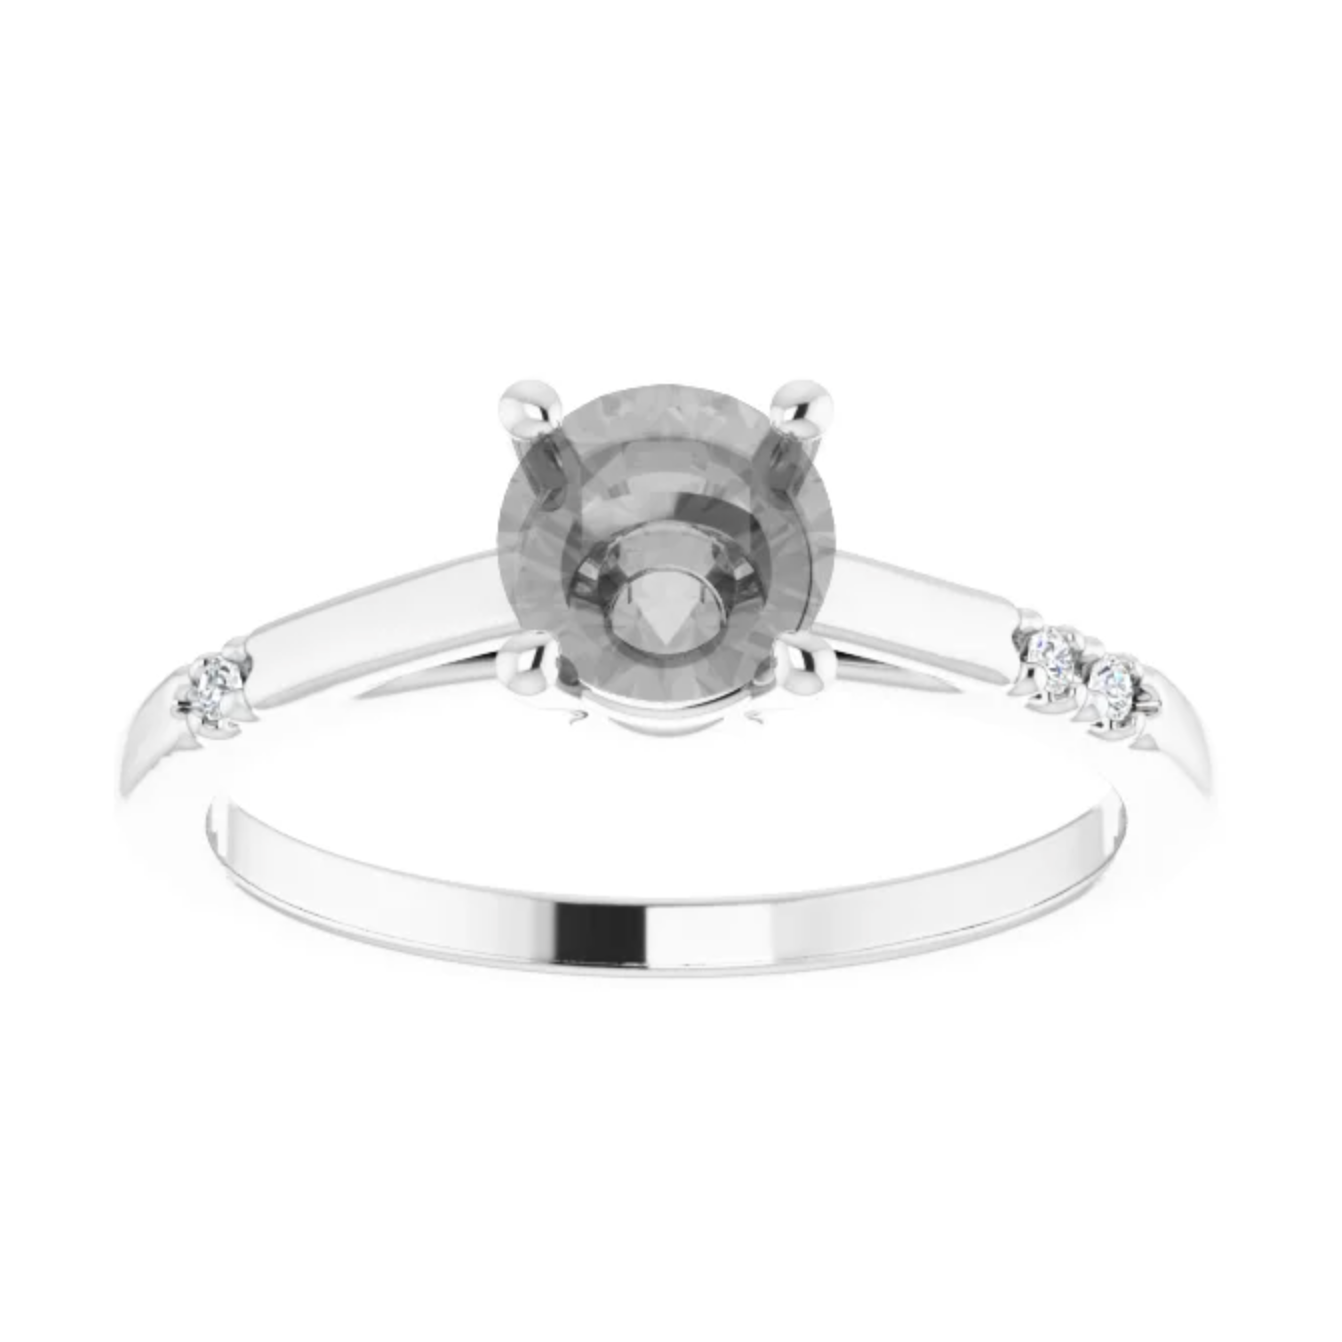 Xavier Setting - Midwinter Co. Alternative Bridal Rings and Modern Fine Jewelry